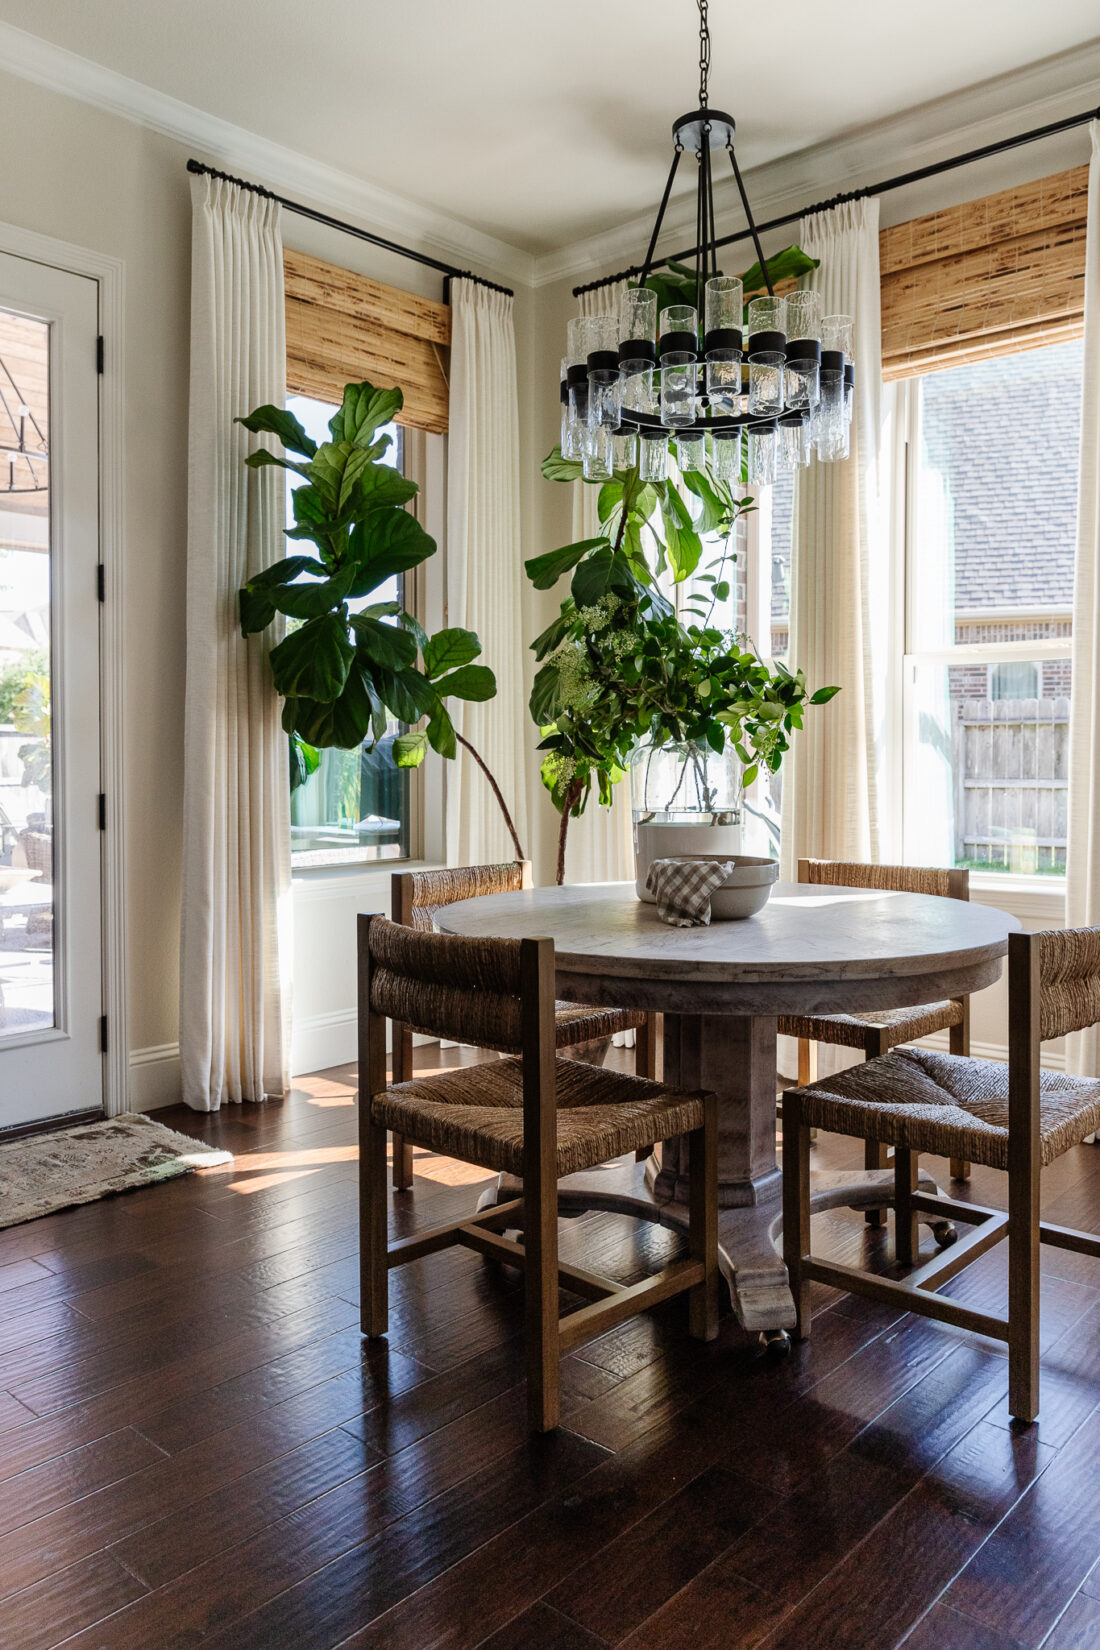 small dining room breakfast nook with round table and pottery barn Malibu woven chairs.  Windows with light drapes and a fiddle leaf fig tree